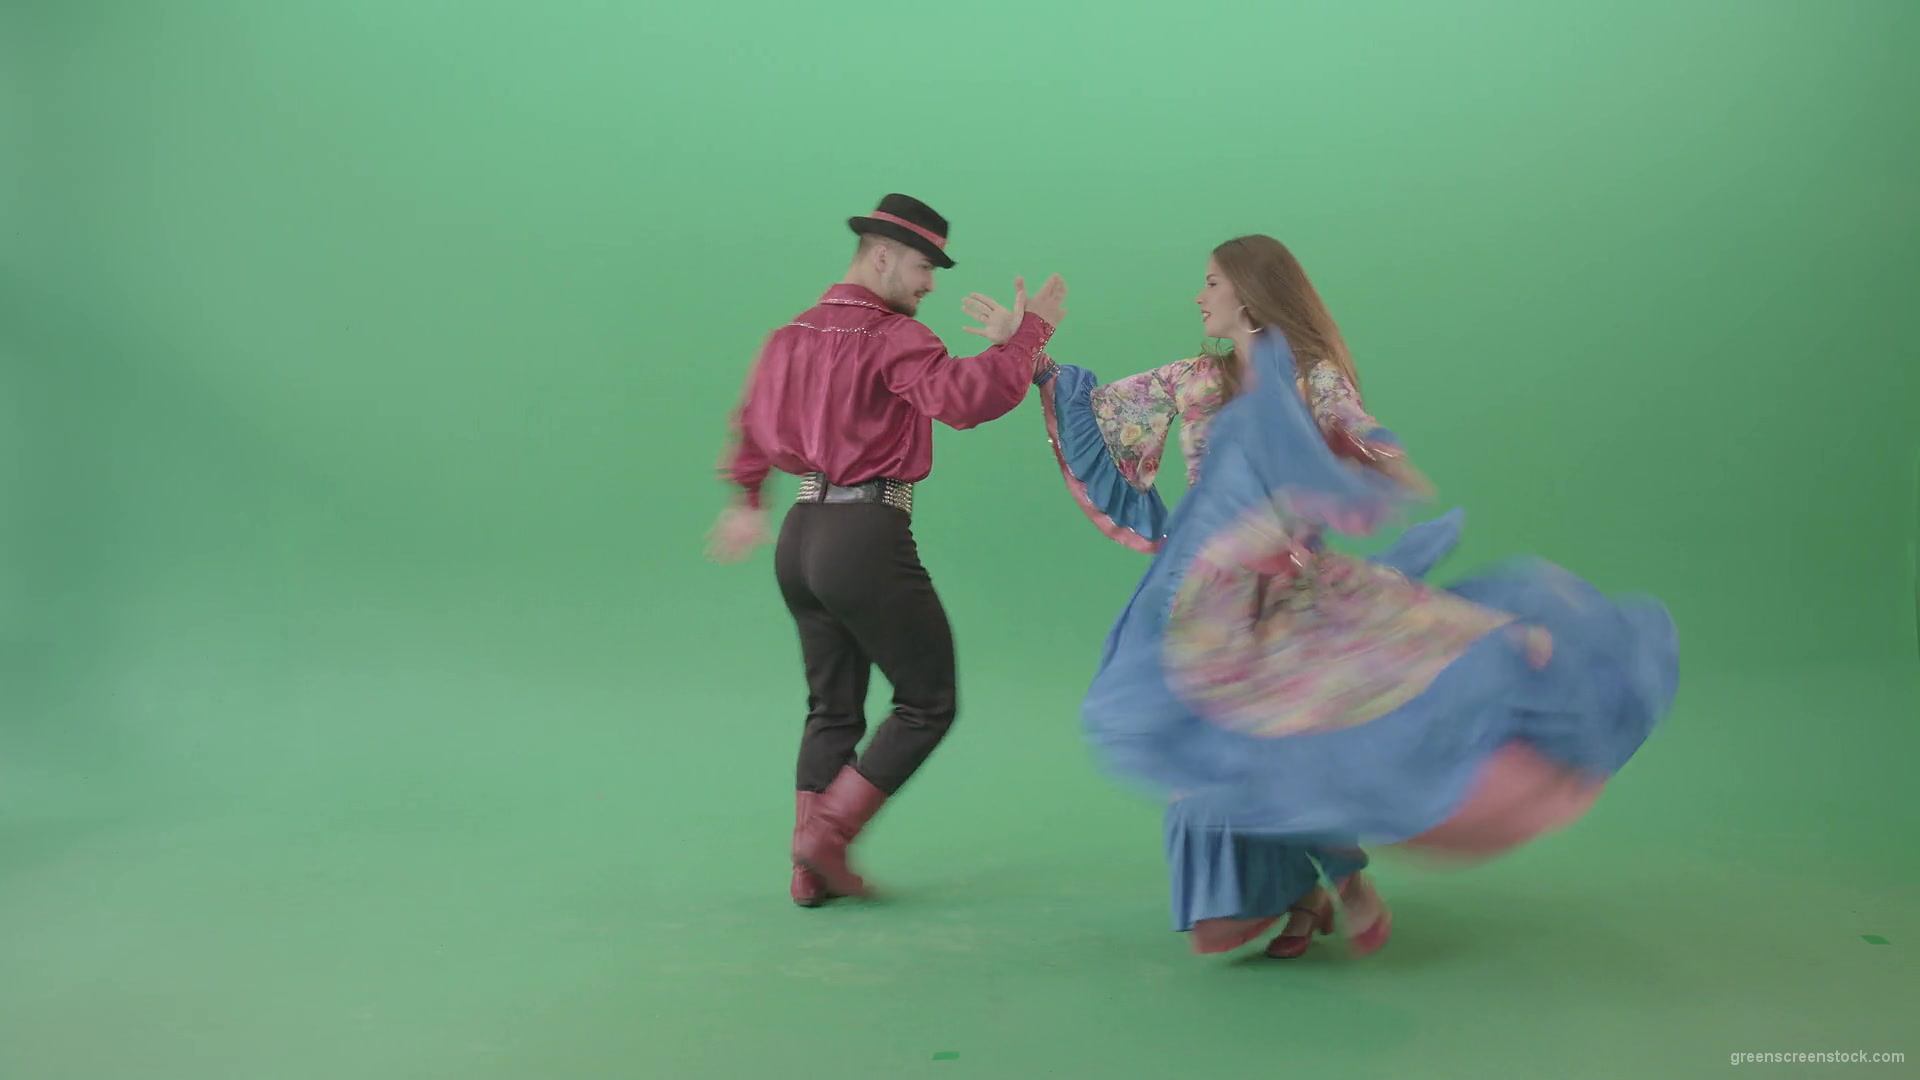 Folk-national-romania-dance-by-gypsy-tzigane-couple-isolated-on-green-screen-4K-video-footage-1920_007 Green Screen Stock